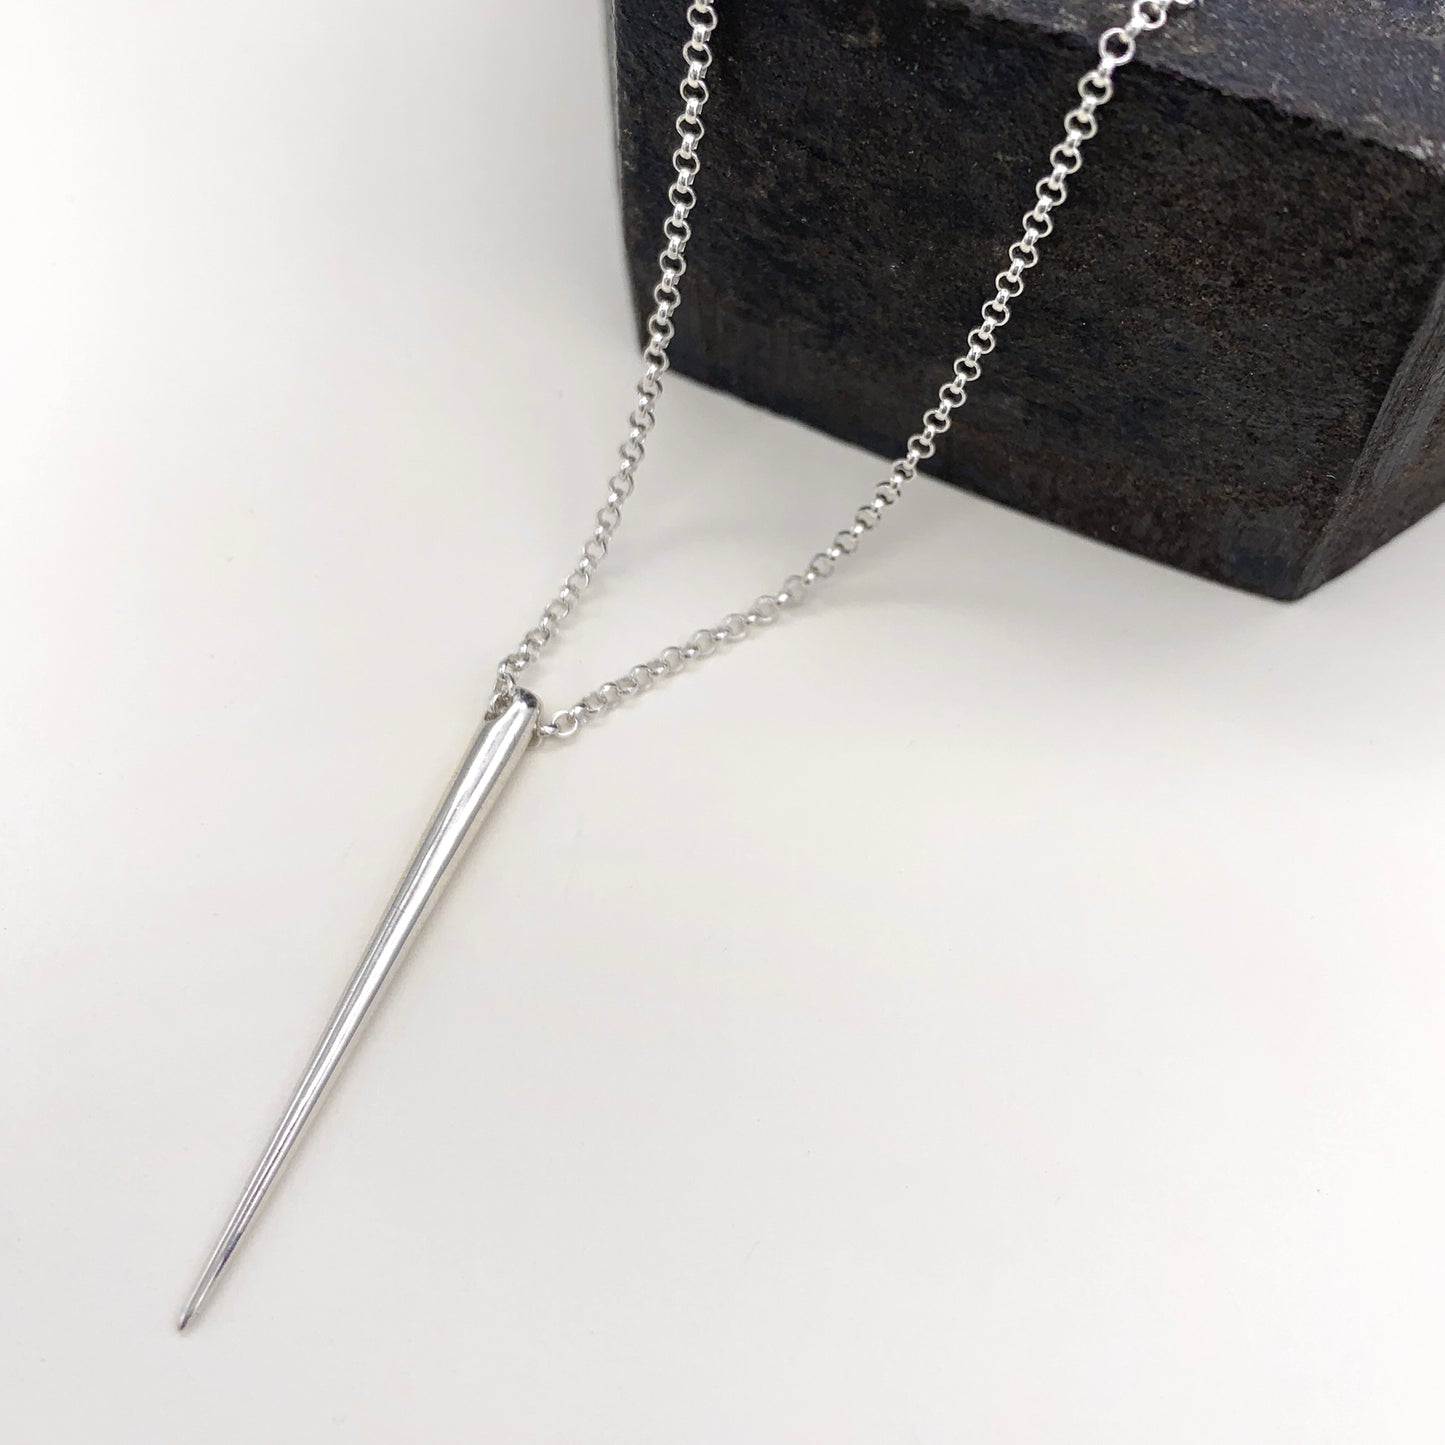 The Spike Necklace